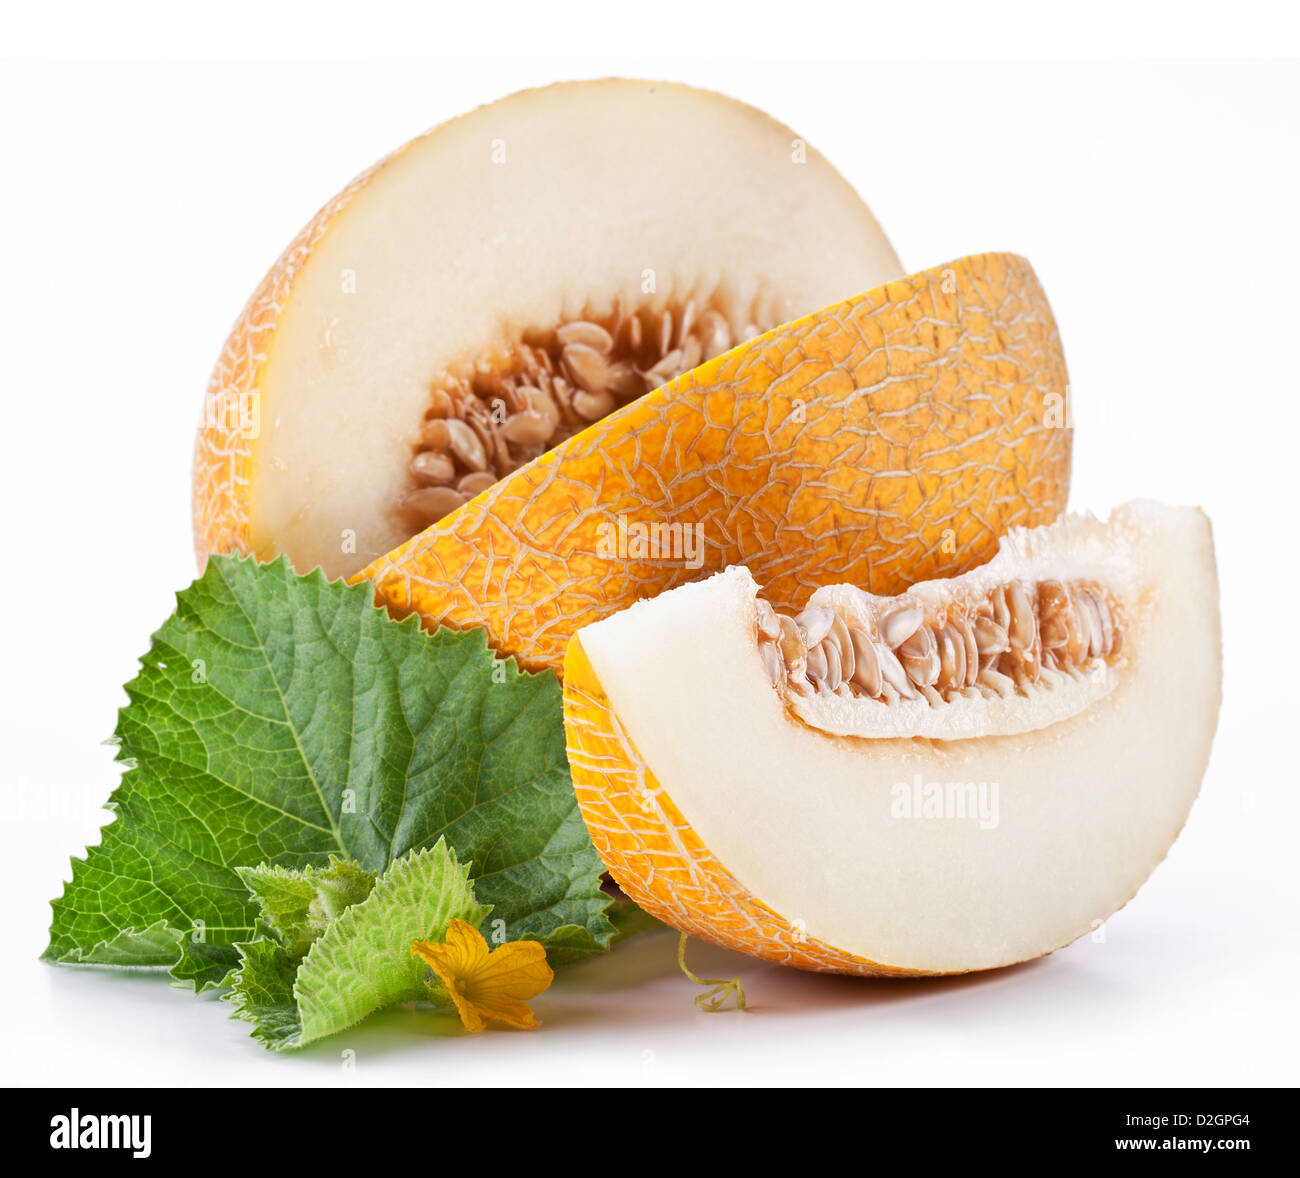 Melon with slices and leaves on a white background. Stock Photo